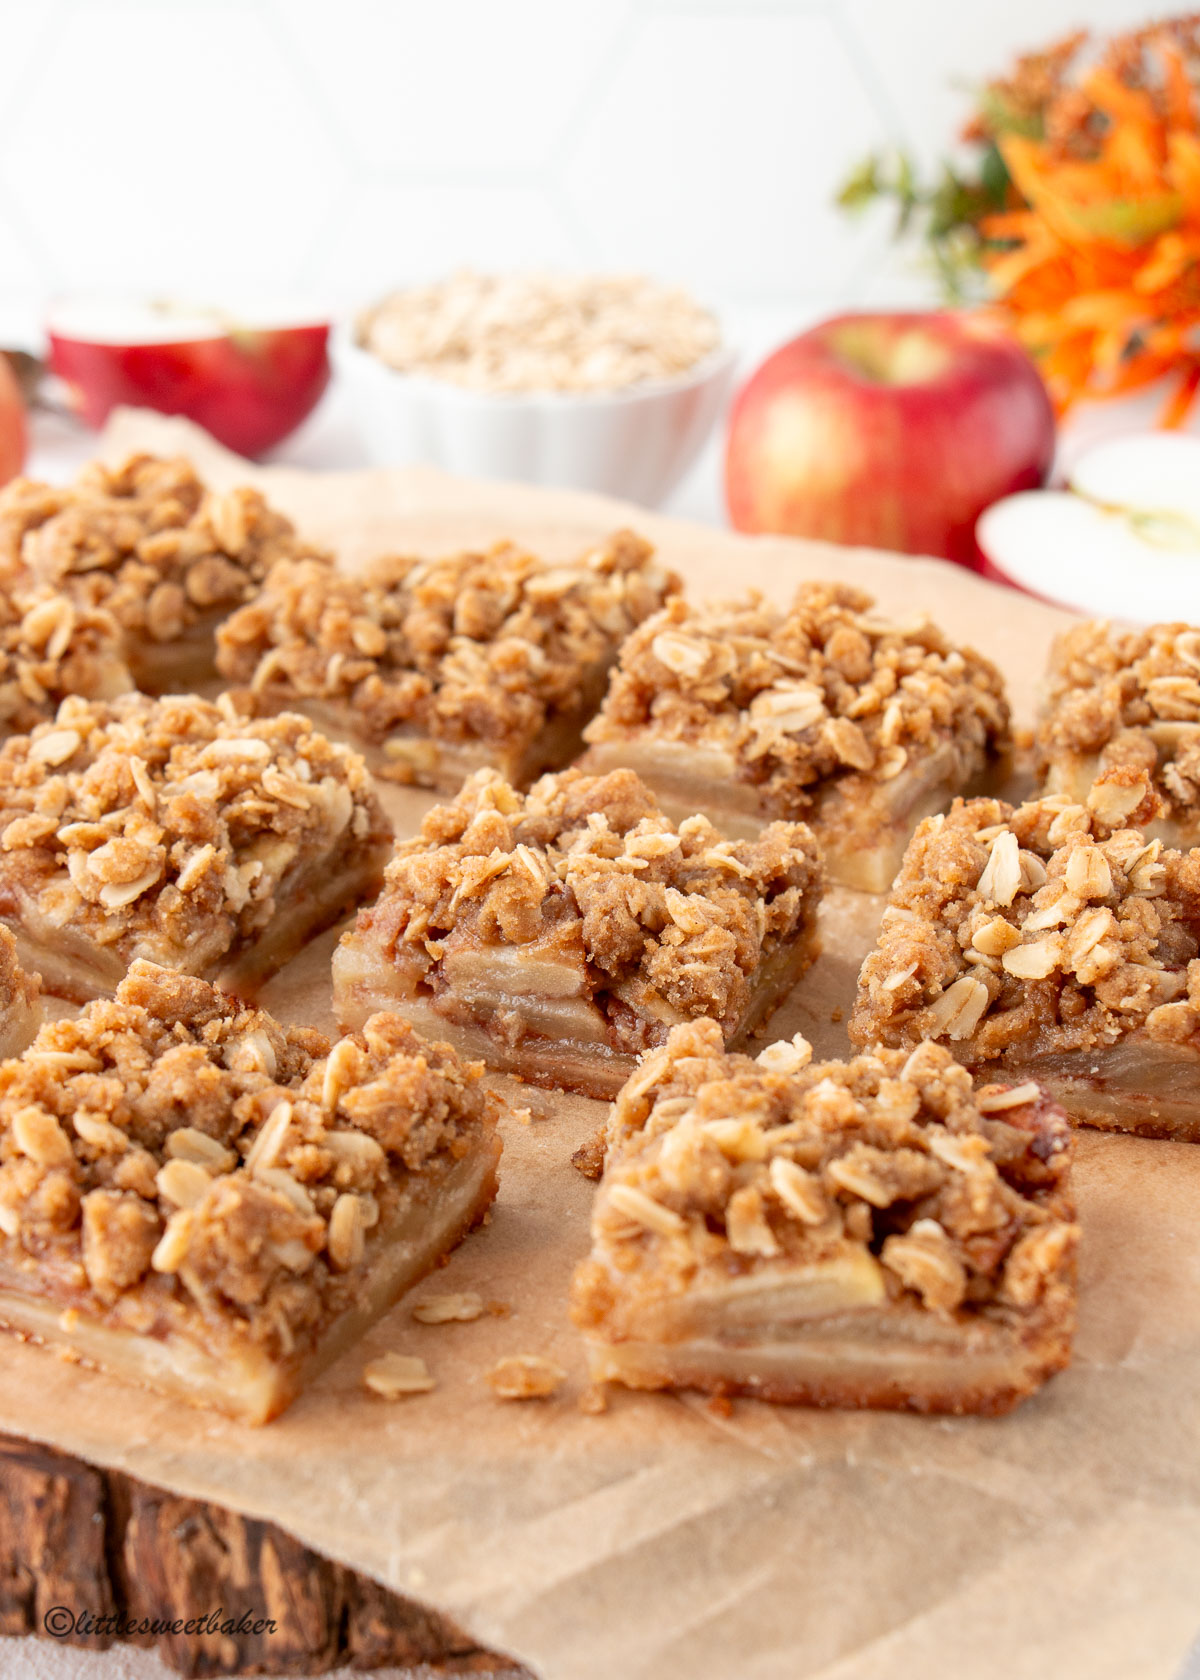 Apple crisp bars on parchment paper and wooden board.